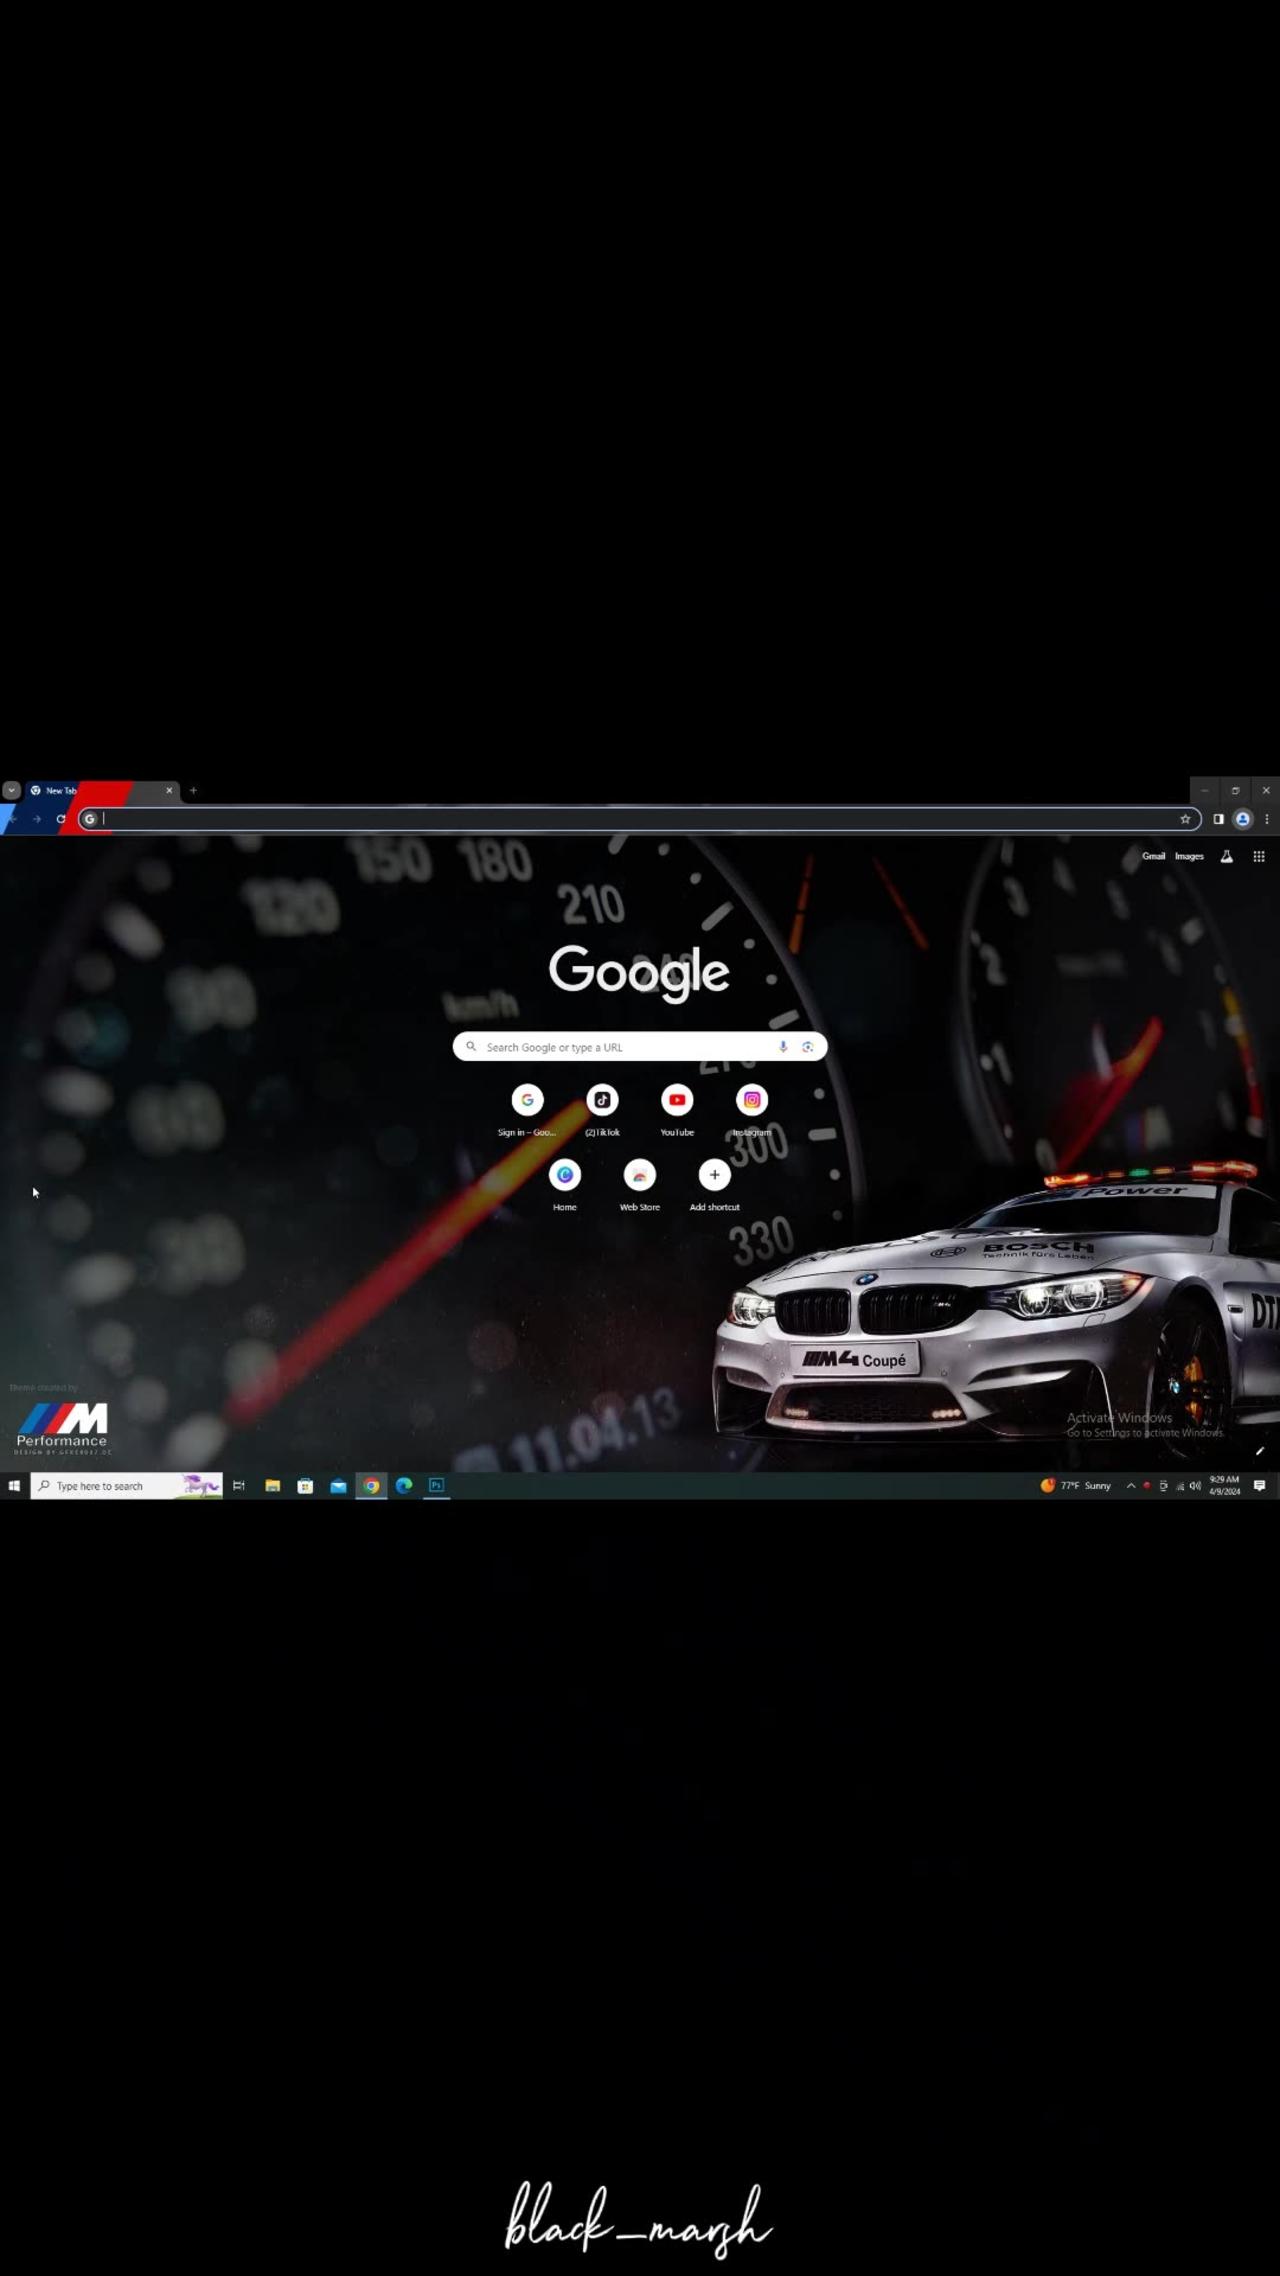 Adding wallpaper to the chrome gome page